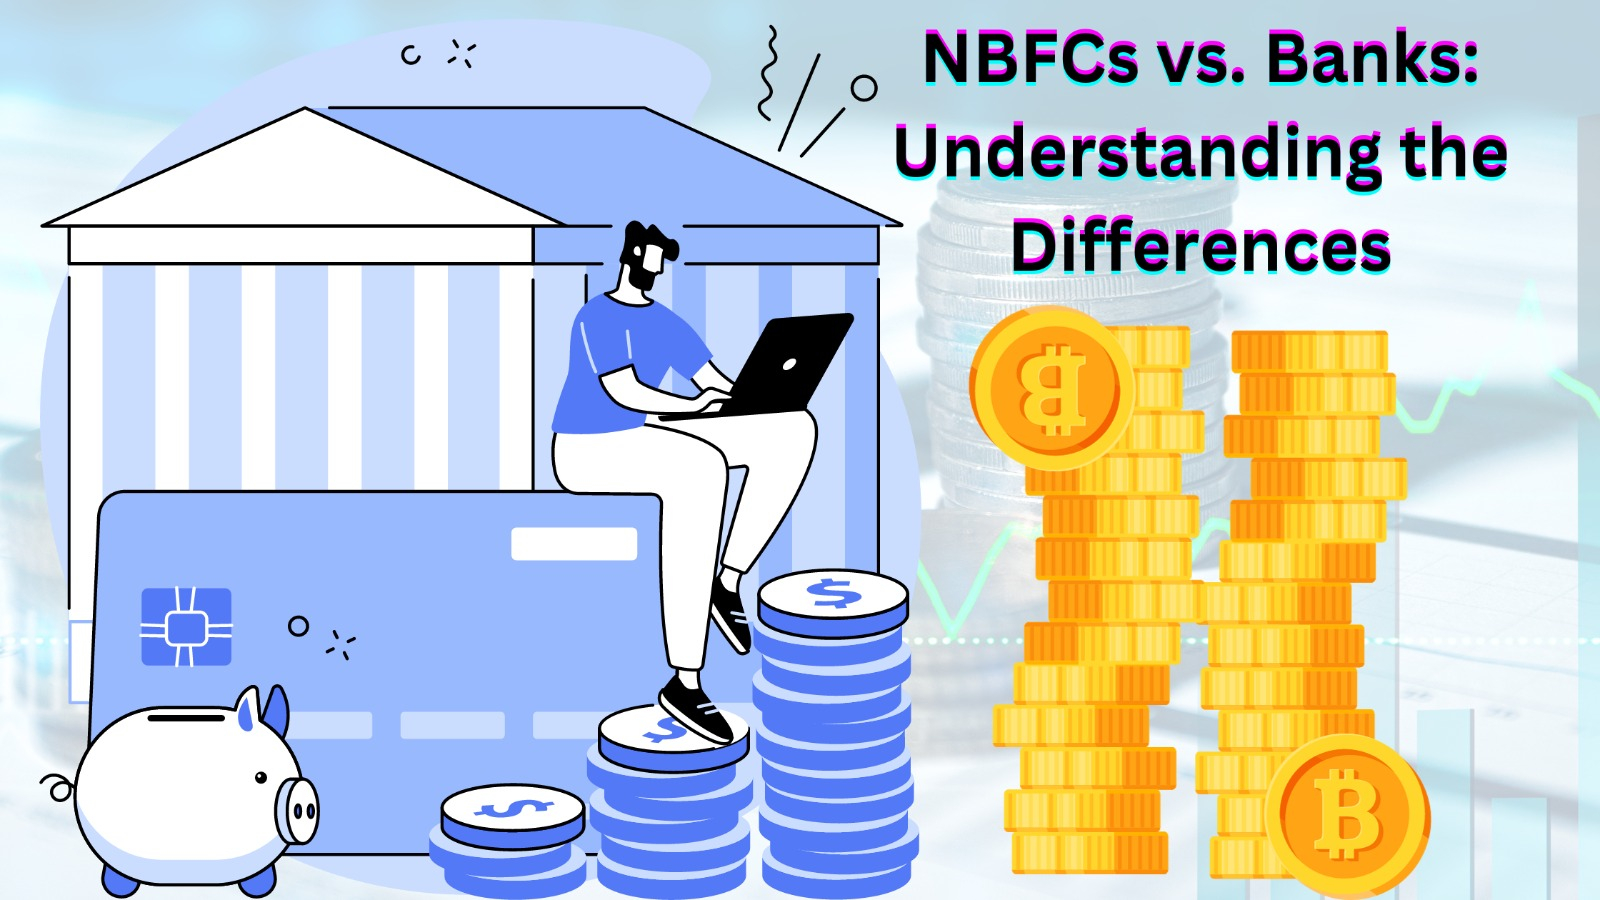 NBFCs vs. Banks Understanding the Differences